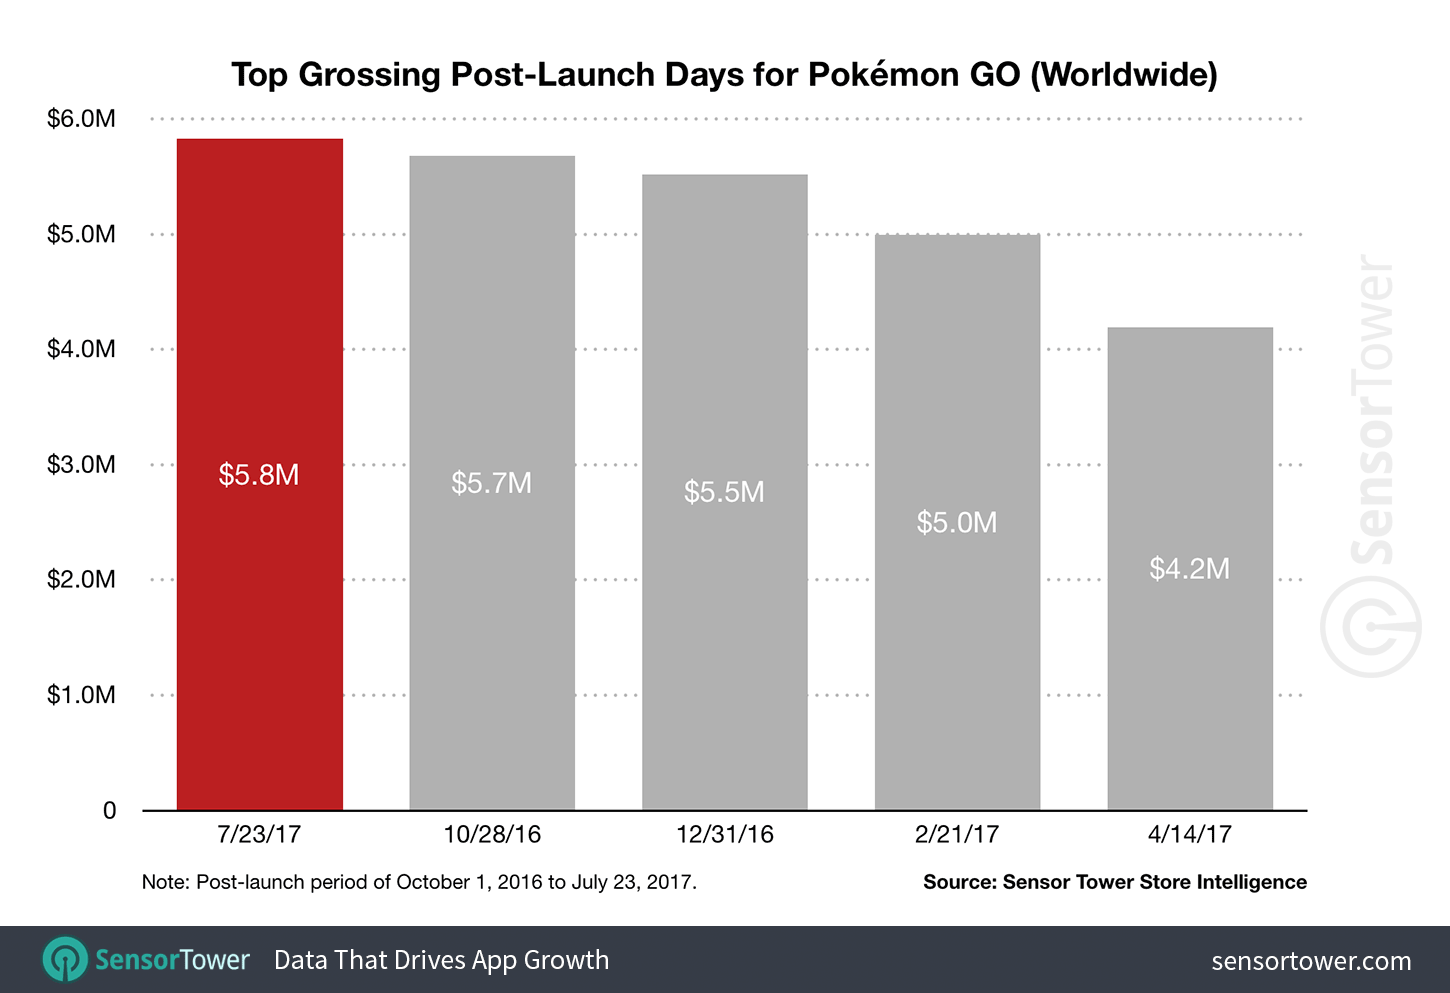 Pokemon Go Legendary launch revenue compared to previous top grossing days